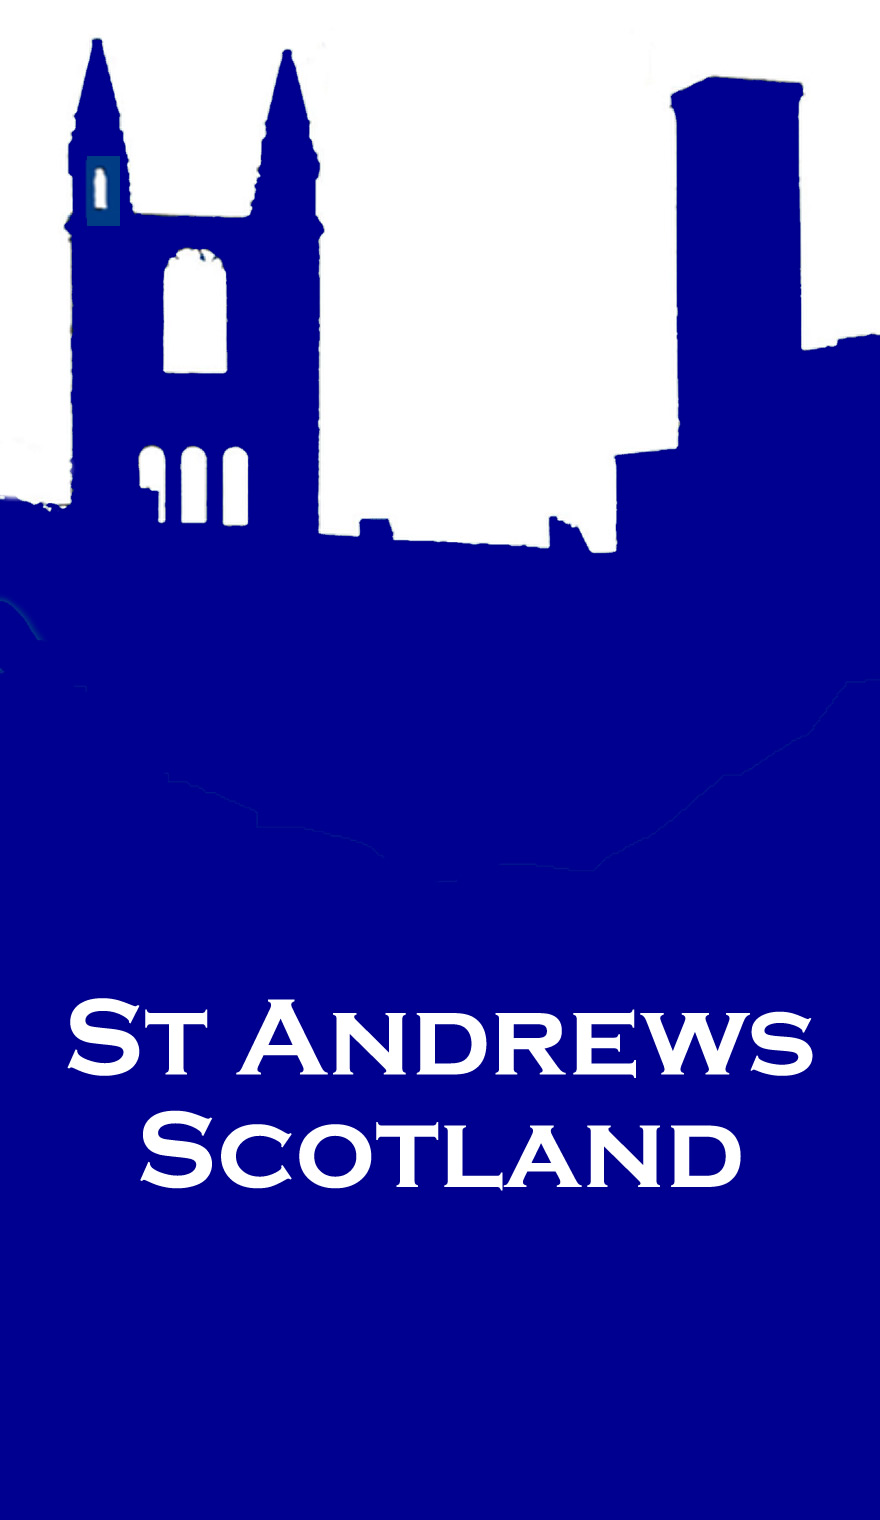 Links to all things to do with St Andrews, Scotland